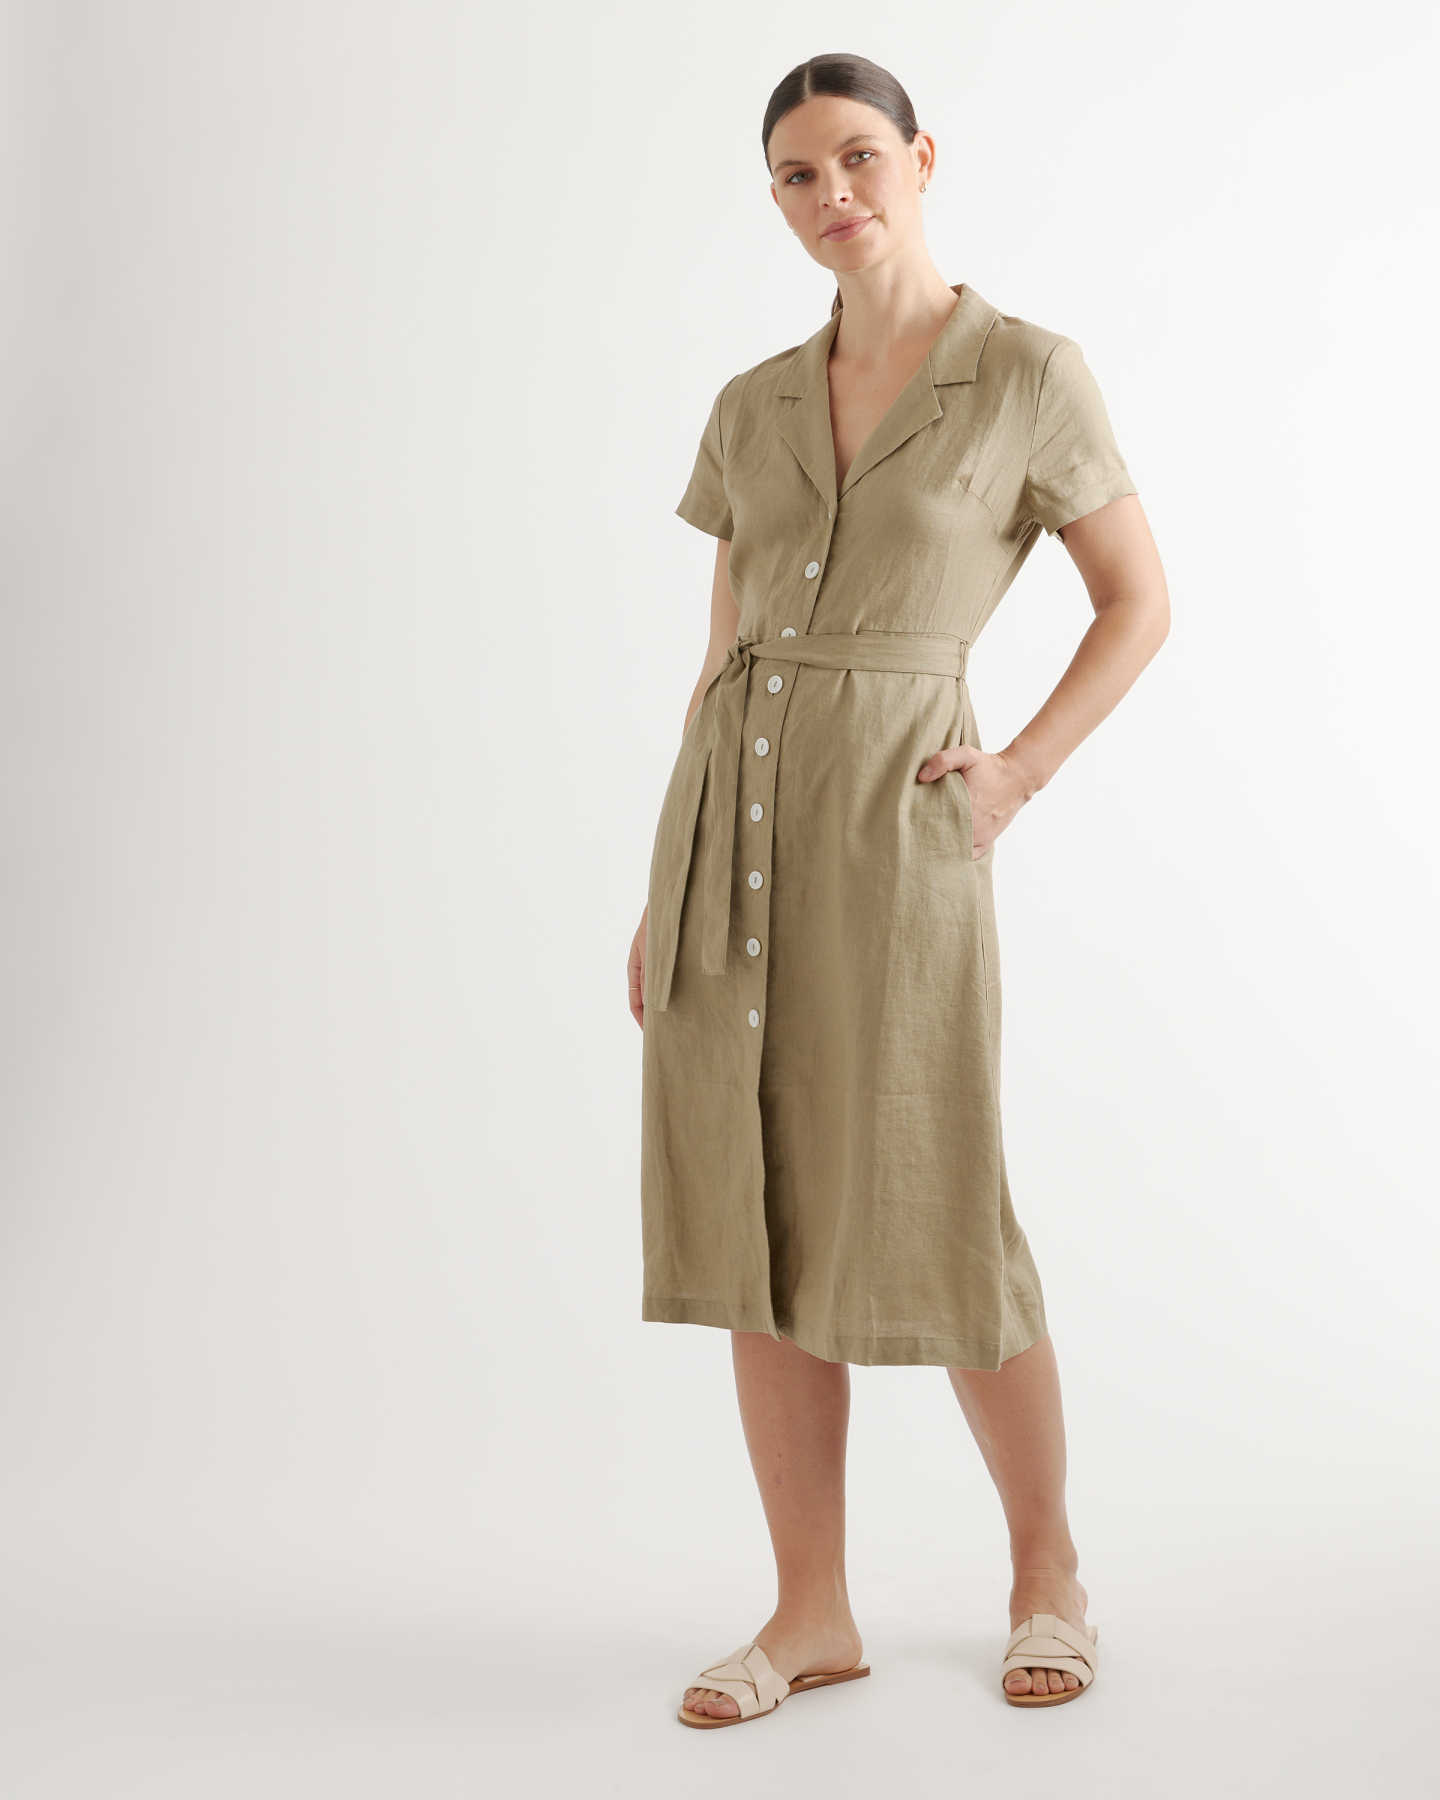 100% European Linen Button Front Dress - Washed Olive